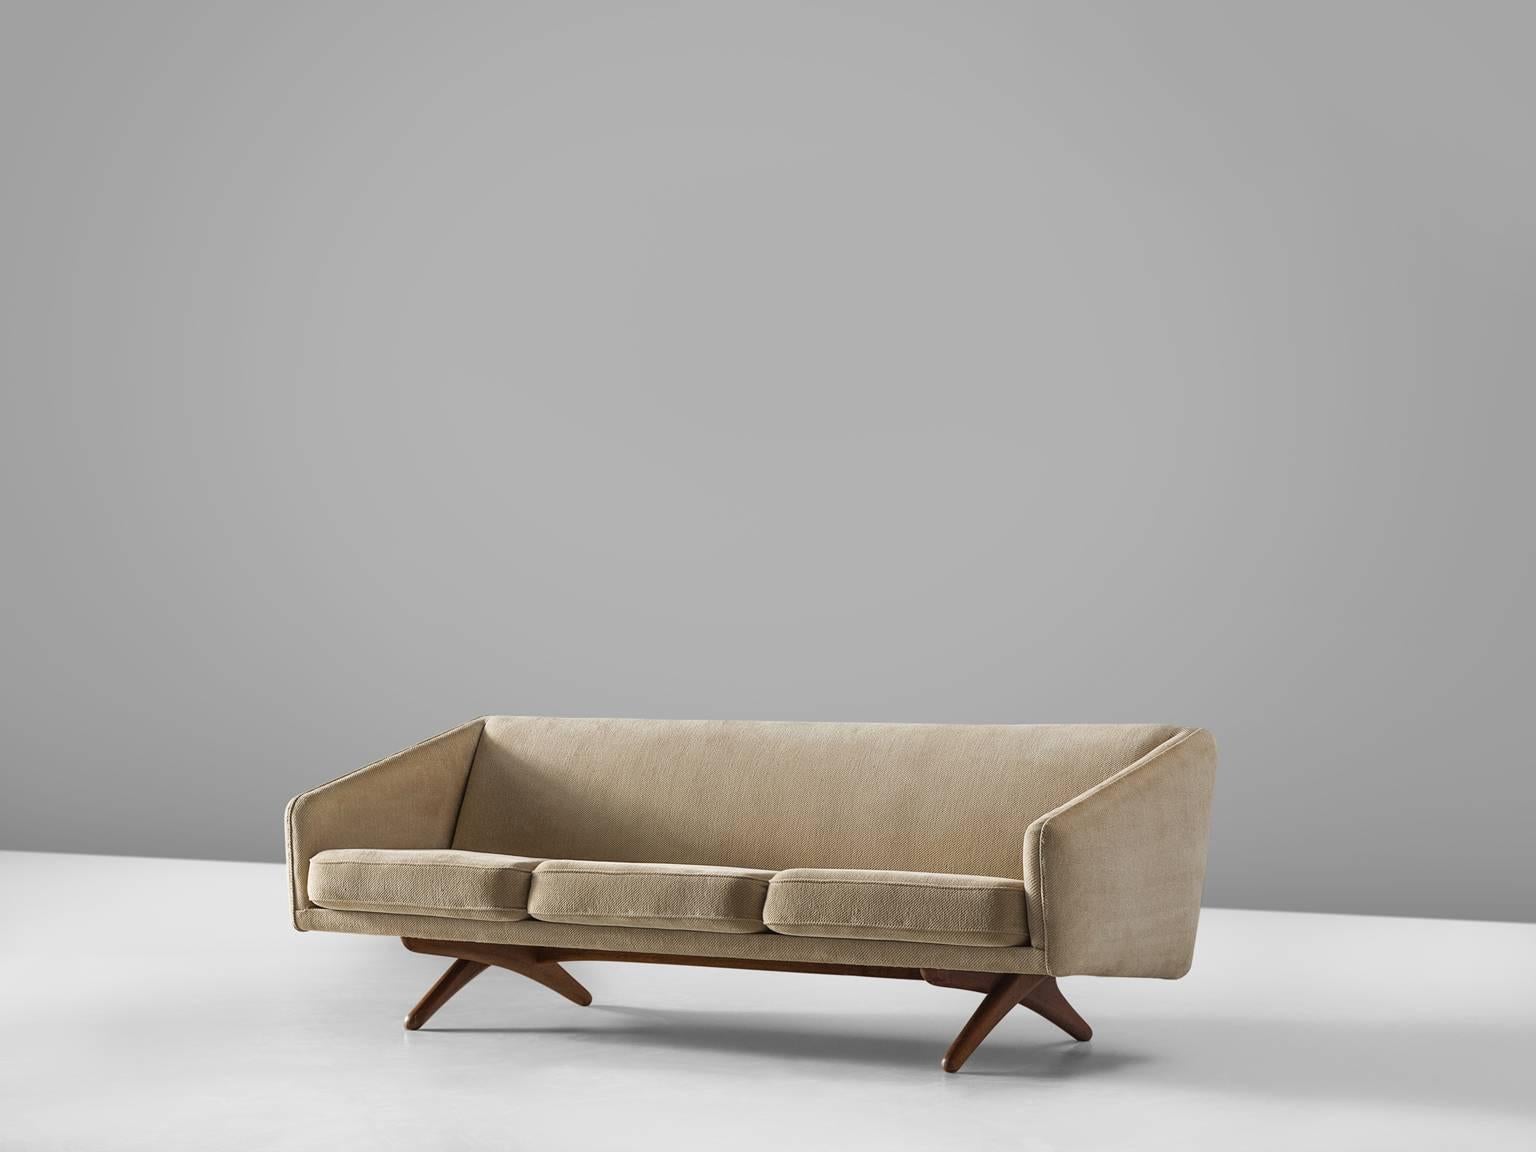 Illum Wikkelsø, sofa model ML-90, beige to grey fabric and oak, by Denmark, 1960. 

Modern sofa by Danish designer Illum Wikkelsø in superb thick and corduroy fabric. This beautiful sofa has a playful and simplified design. The seating is